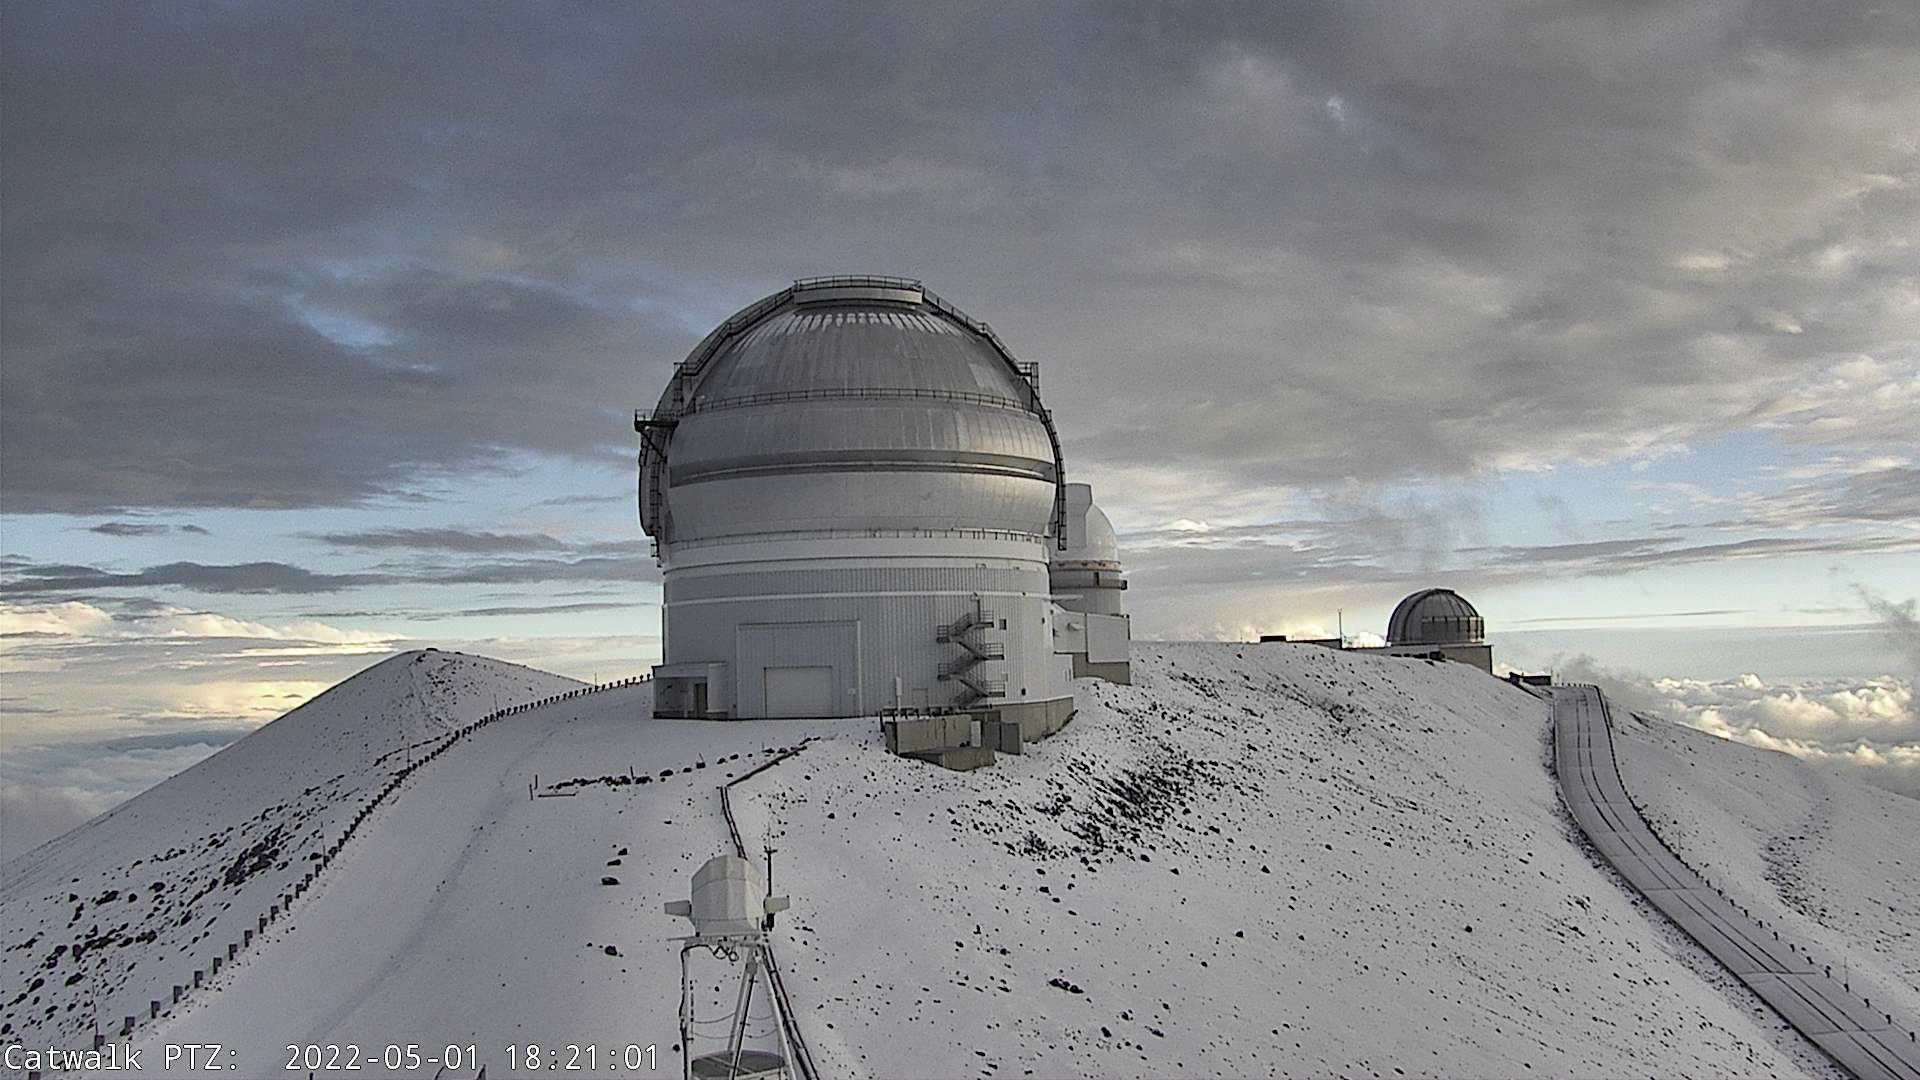 This view of the summit of Mauna Kea shows May kicking off with fresh snow cover. The image was captured by a webcam set up by the Canada-France-Hawaii Telescope. Image: CFH Telescope